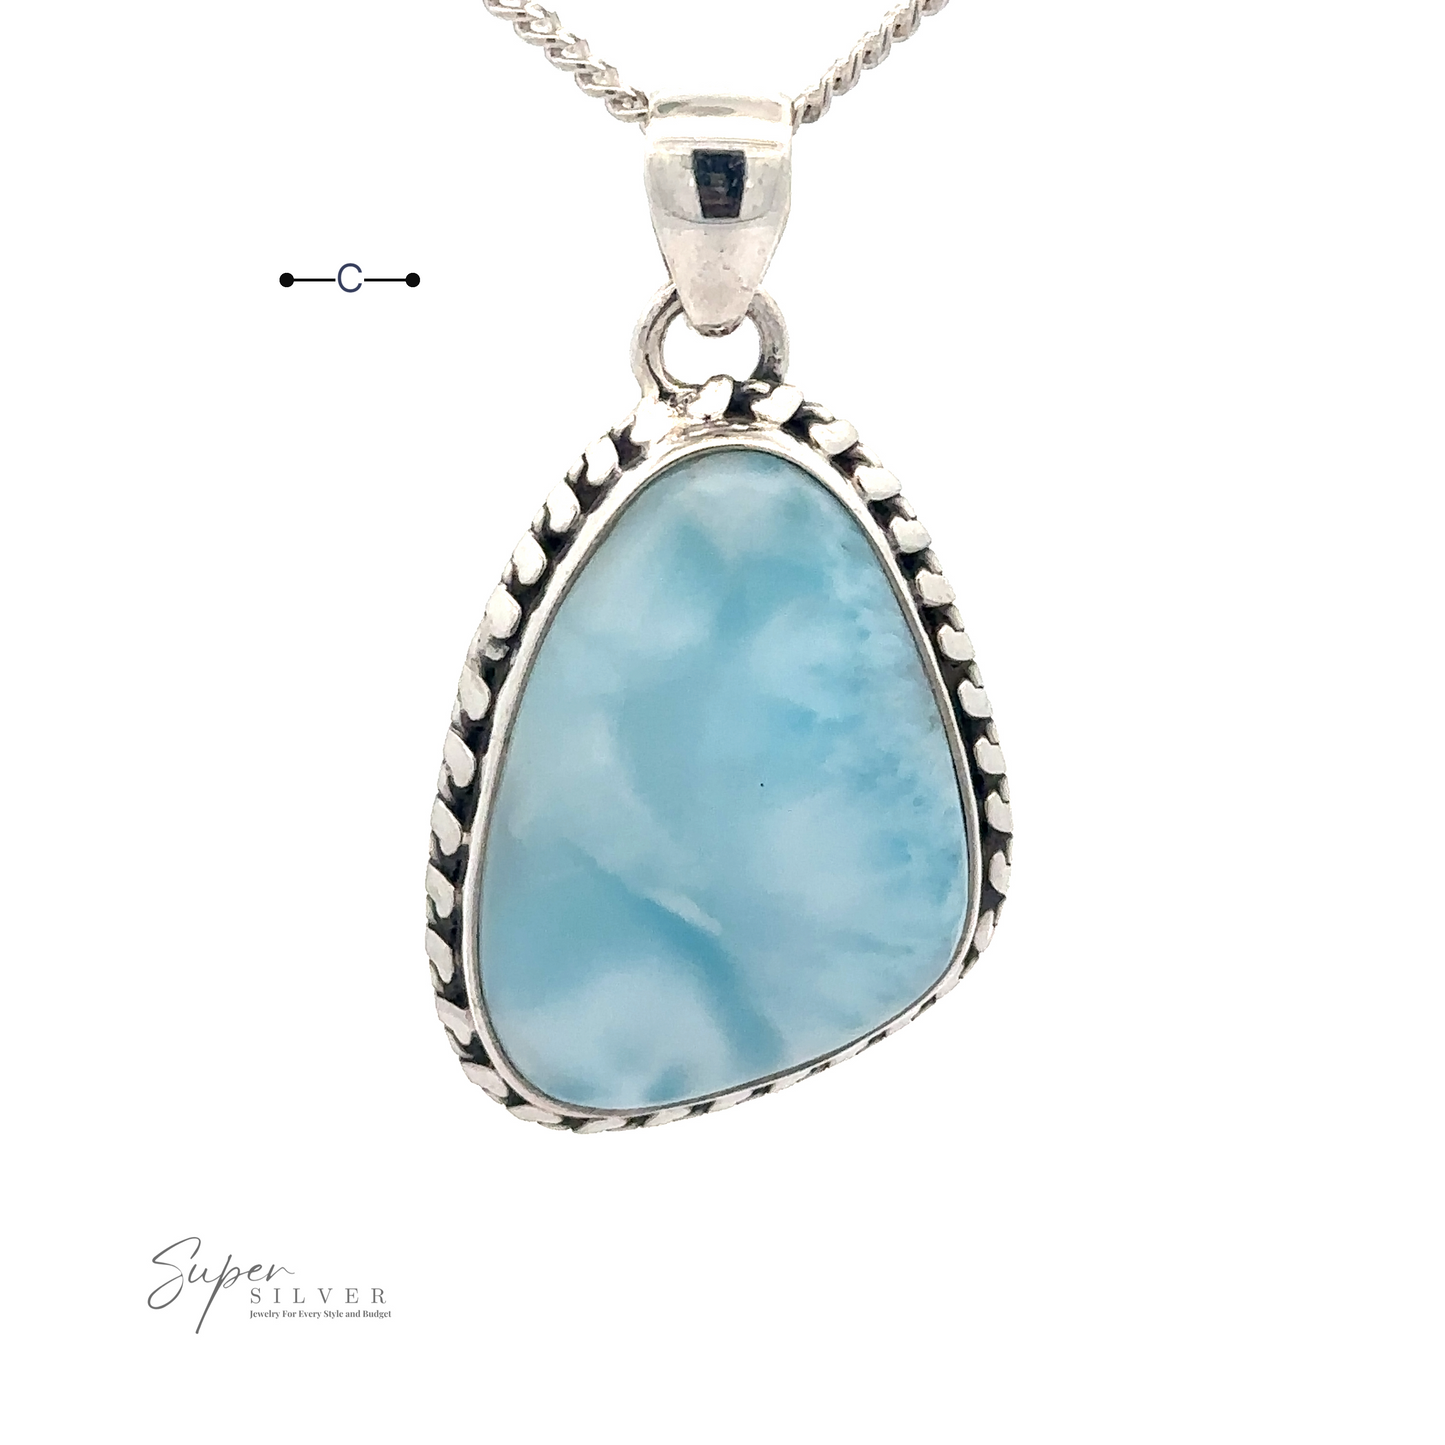 
                  
                    A silver necklace with a triangular pendant featuring a large, light blue Larimar stone with a marbled pattern. The pendant has a detailed border design and is crafted from .925 Sterling Silver. The text "Larimar Pendant with Decorated Border" is at the bottom left. Chain not included.
                  
                